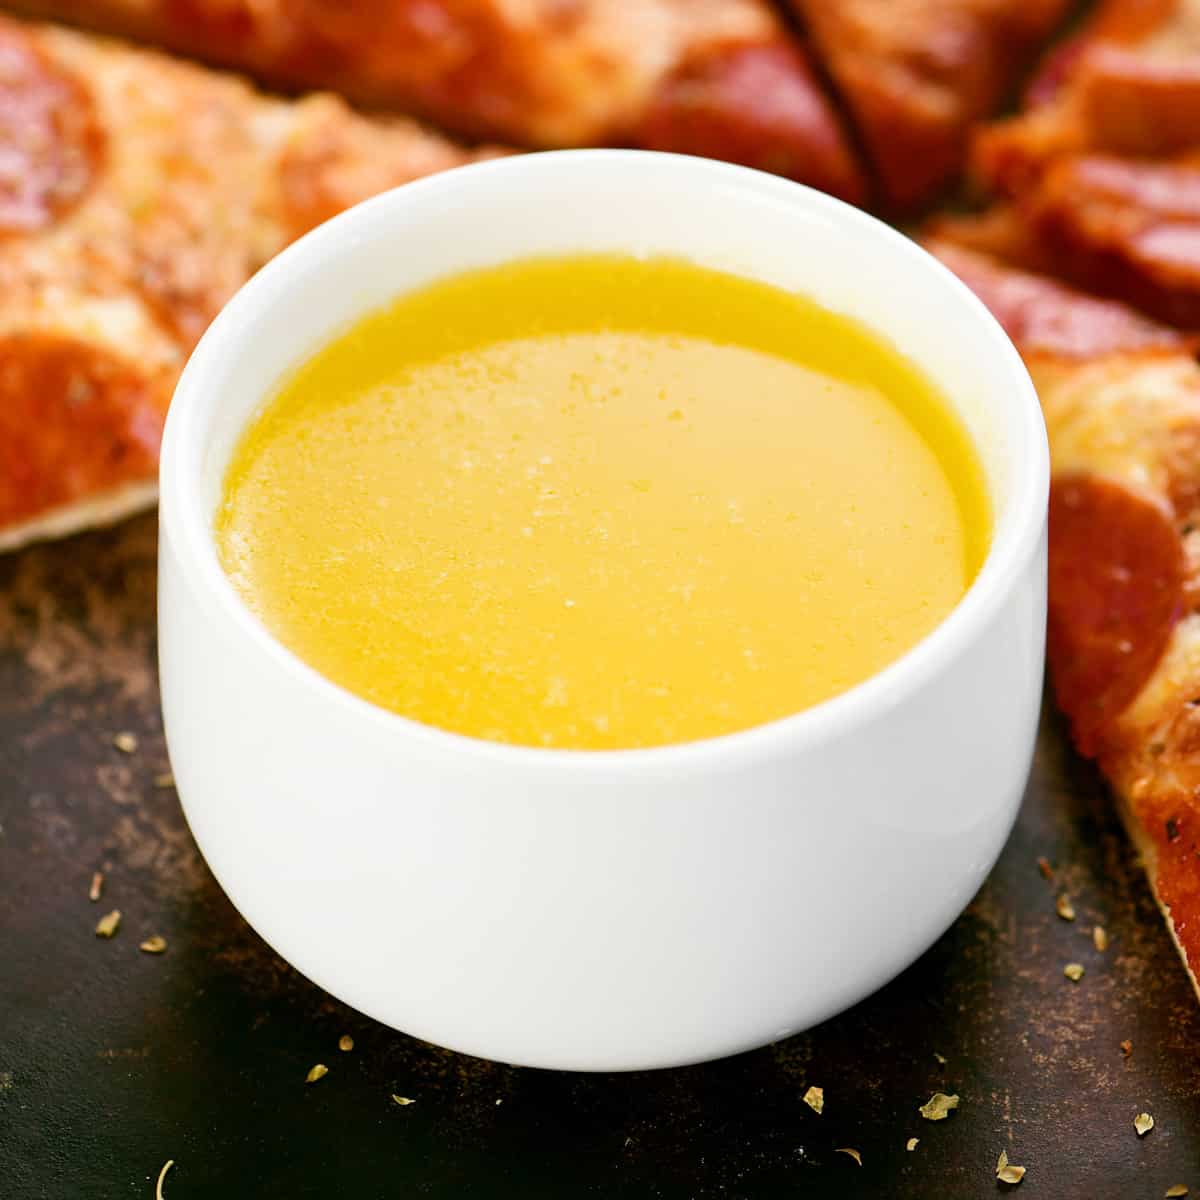 A small white bowl of garlic butter dipping sauce.